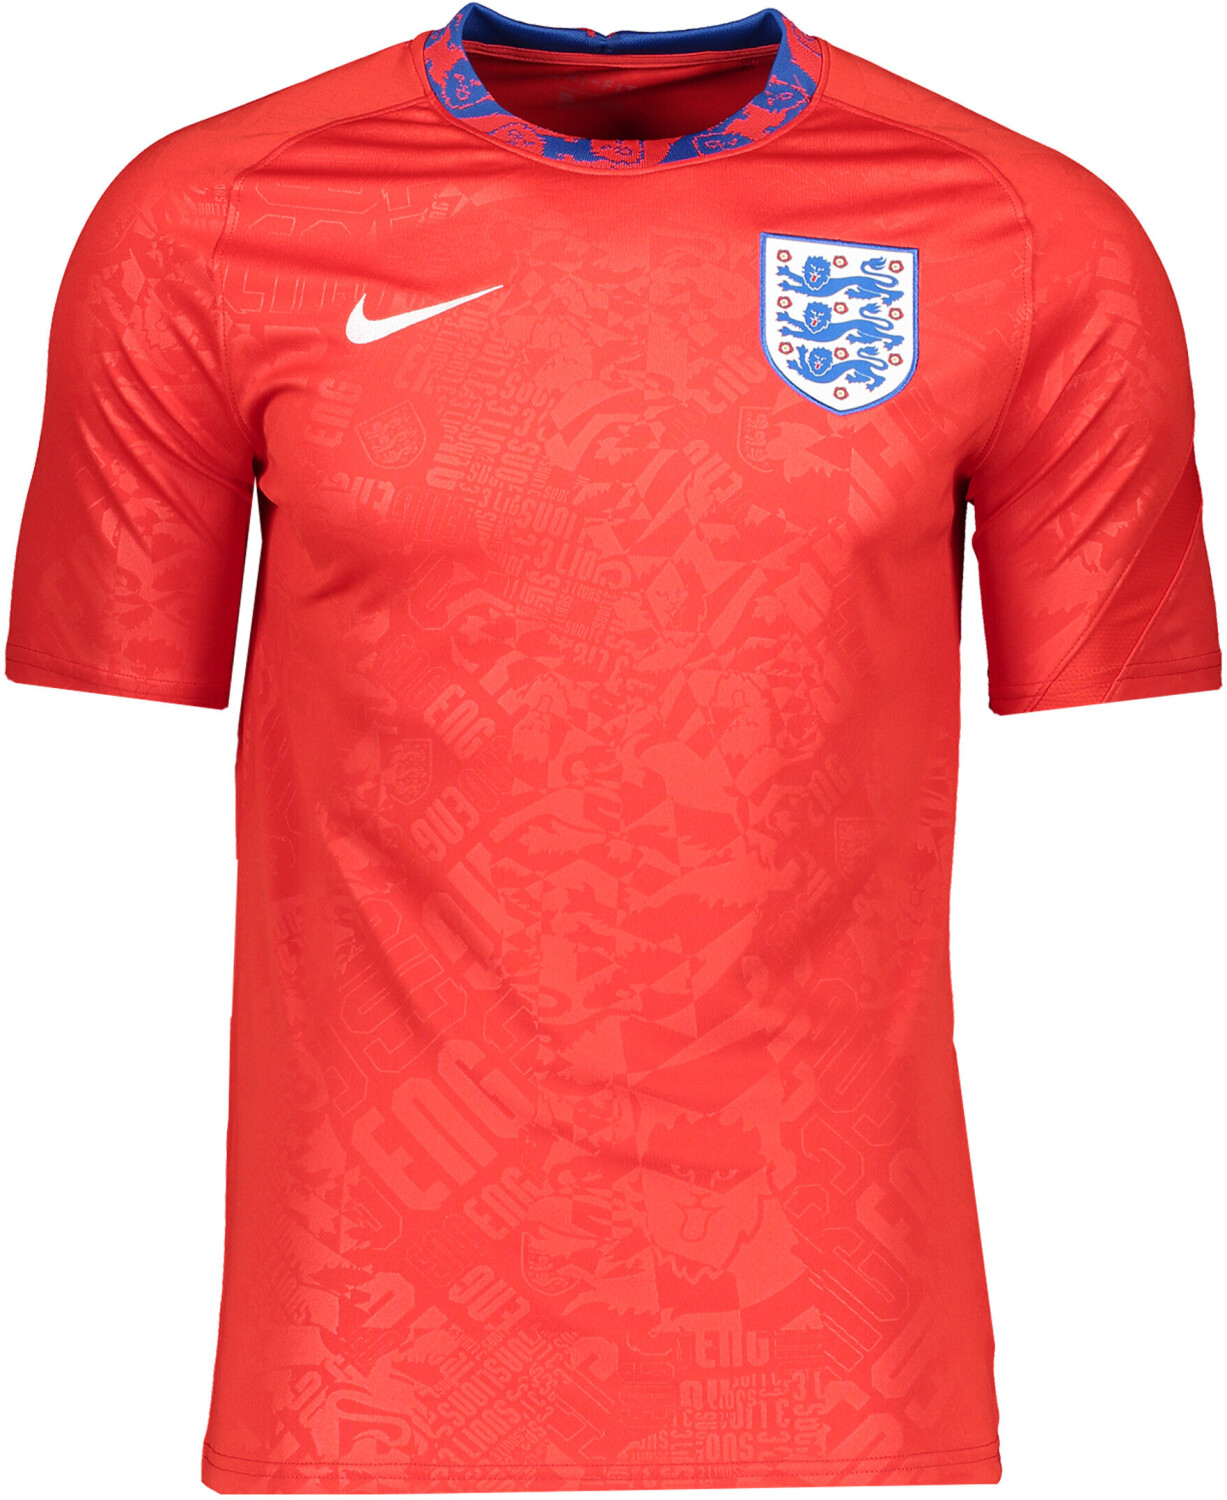 Buy Nike England Breathe Shirt 2020 from £38.10 (Today) – Best Deals on ...